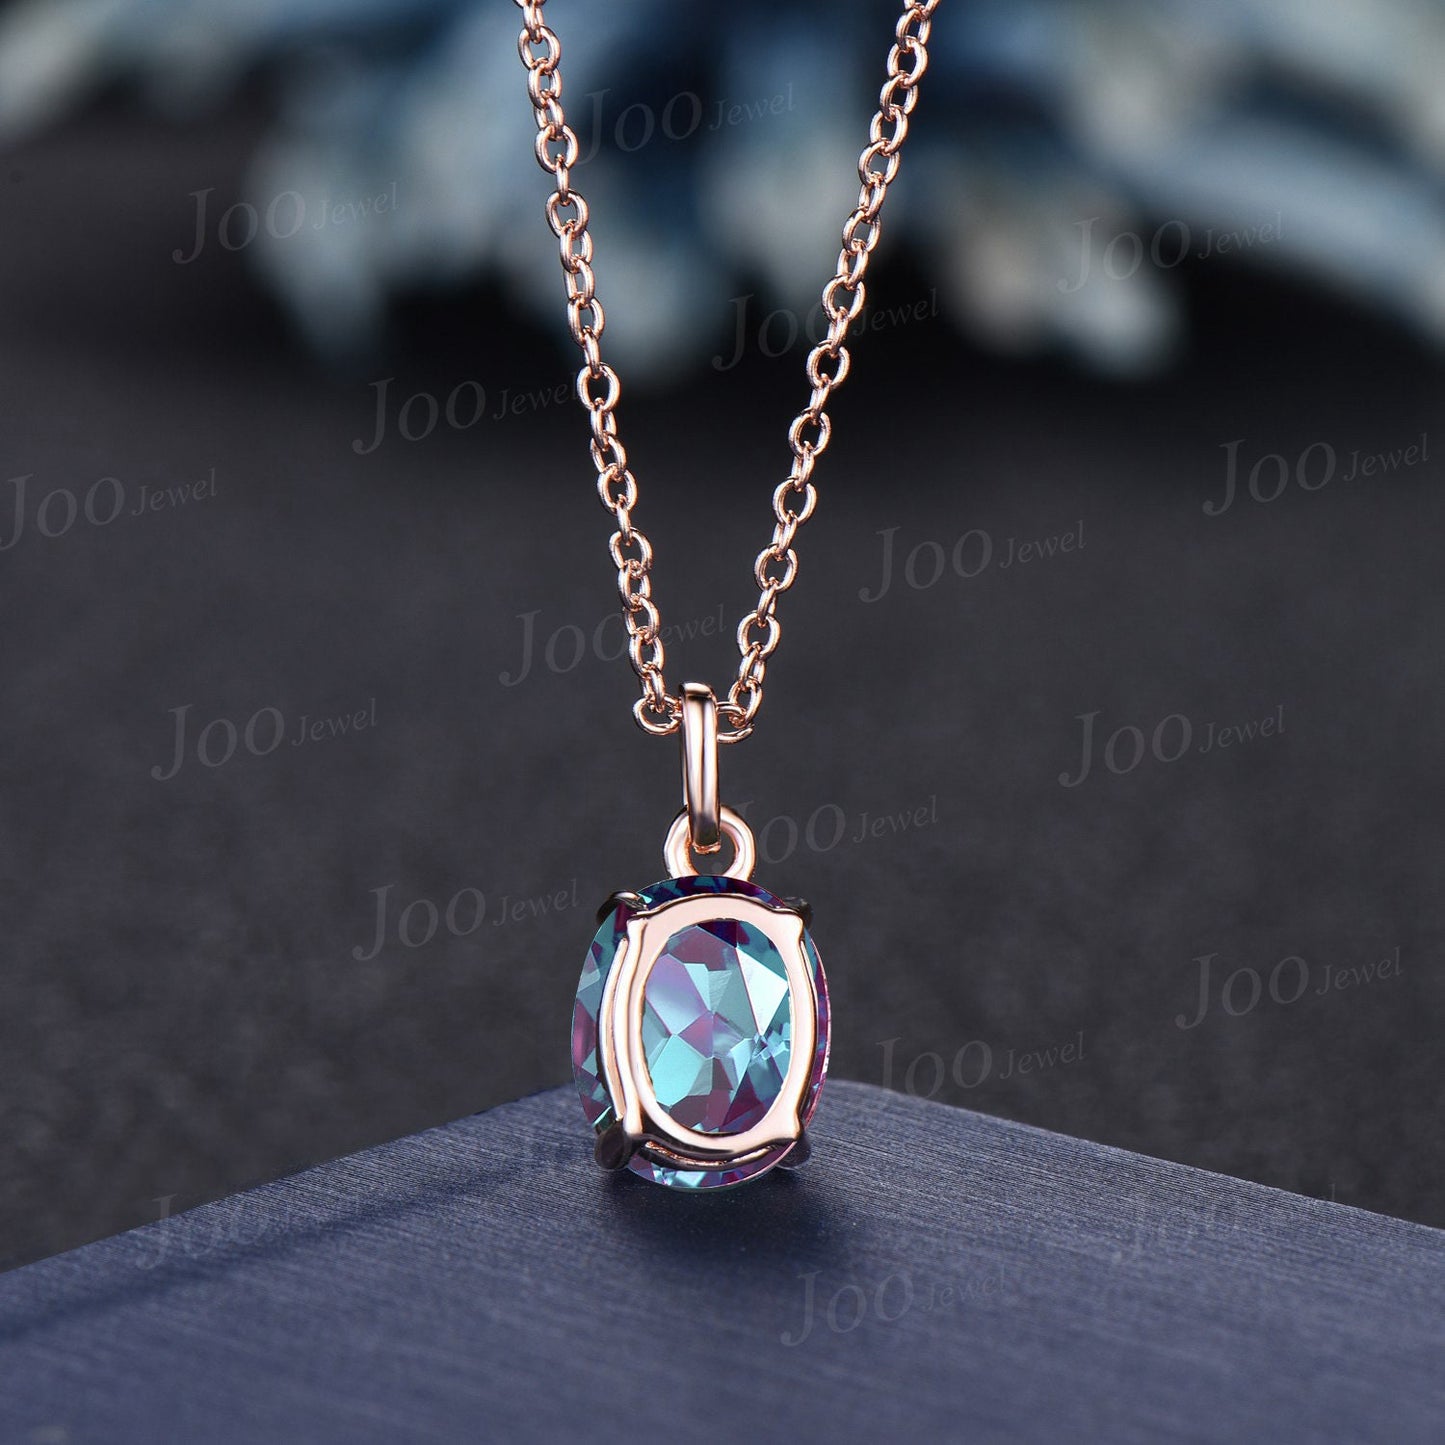 Oval Cut Color-Change Alexandrite Necklace Silver/Solid 14k/18k Rose Gold Vintage Personalized Wedding Pendant Women Anniversary Bridal Gift